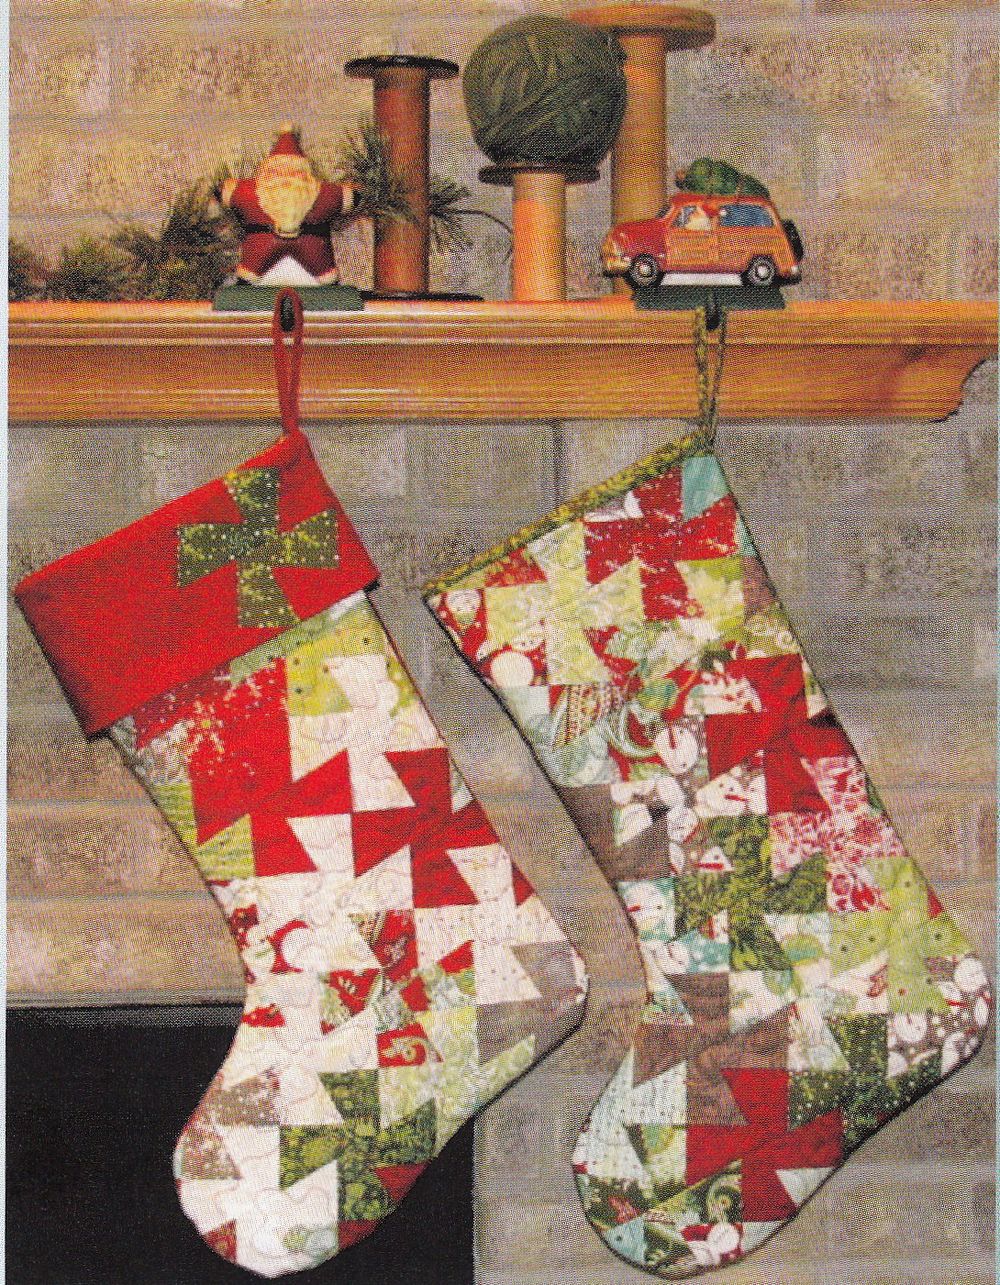 Stocking Sweet Stocking Quilt Pattern by Lorrie Franz of Bean Counter Quilts